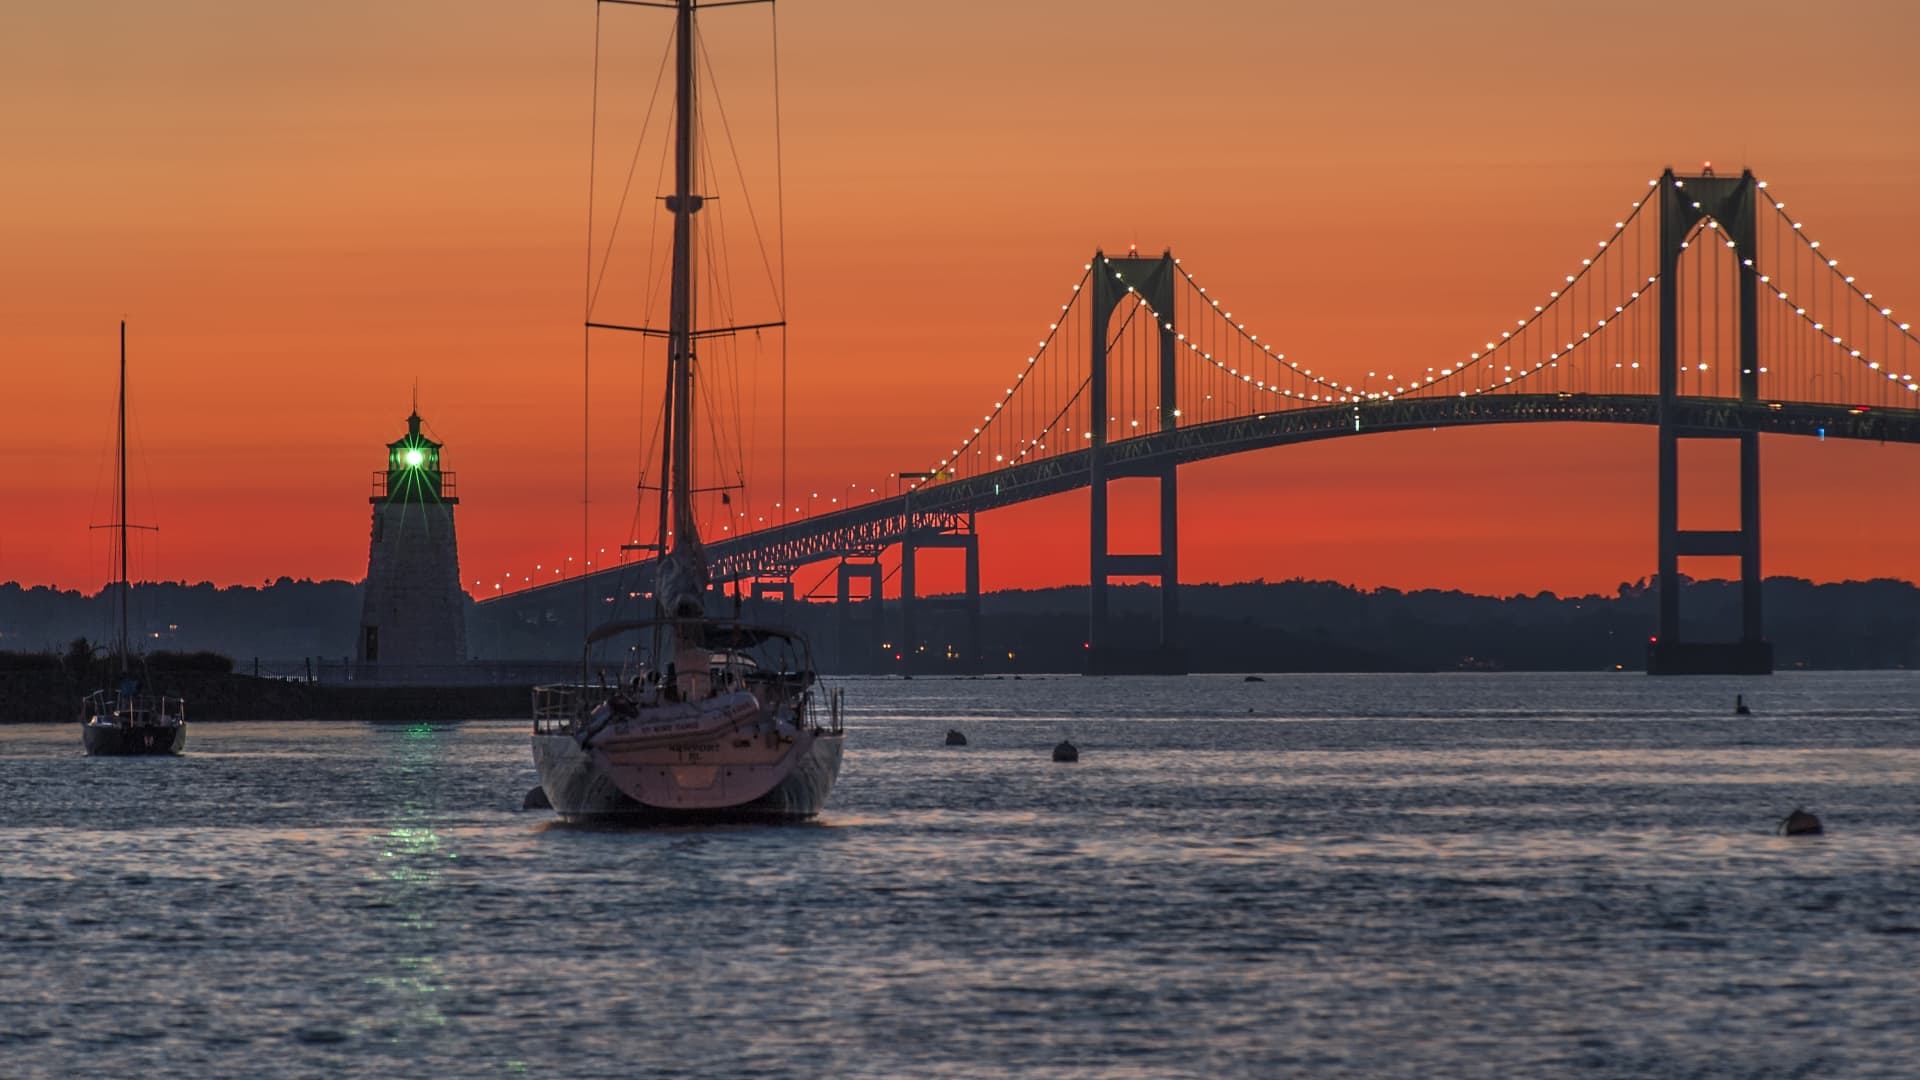 Goat Island lighthouse and the Jamestown or Pell Bridge at sunset.